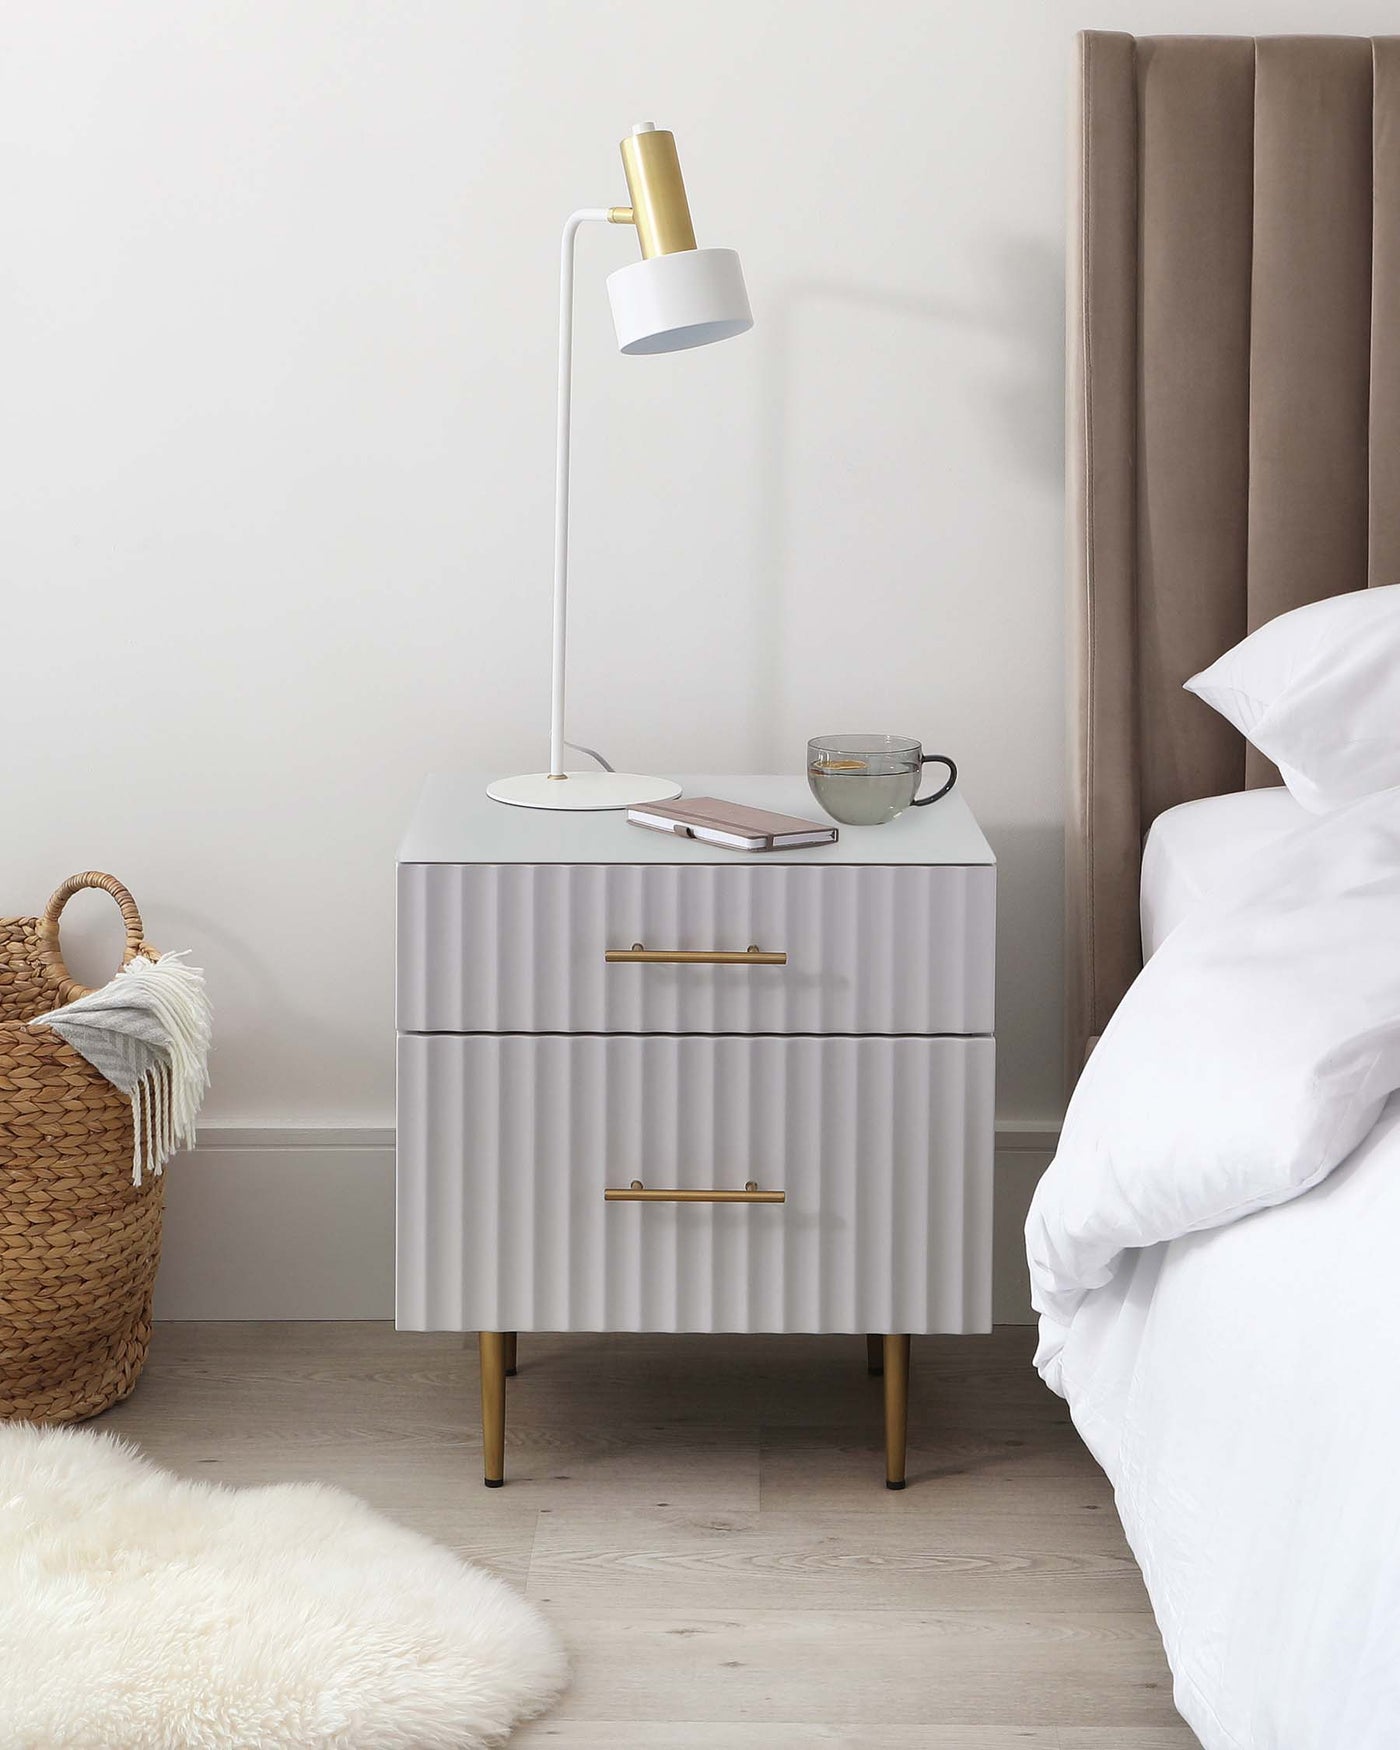 Elegant white ridged bedside table with brass accent handles and tapered legs, accompanied by a modern white and gold floor lamp.